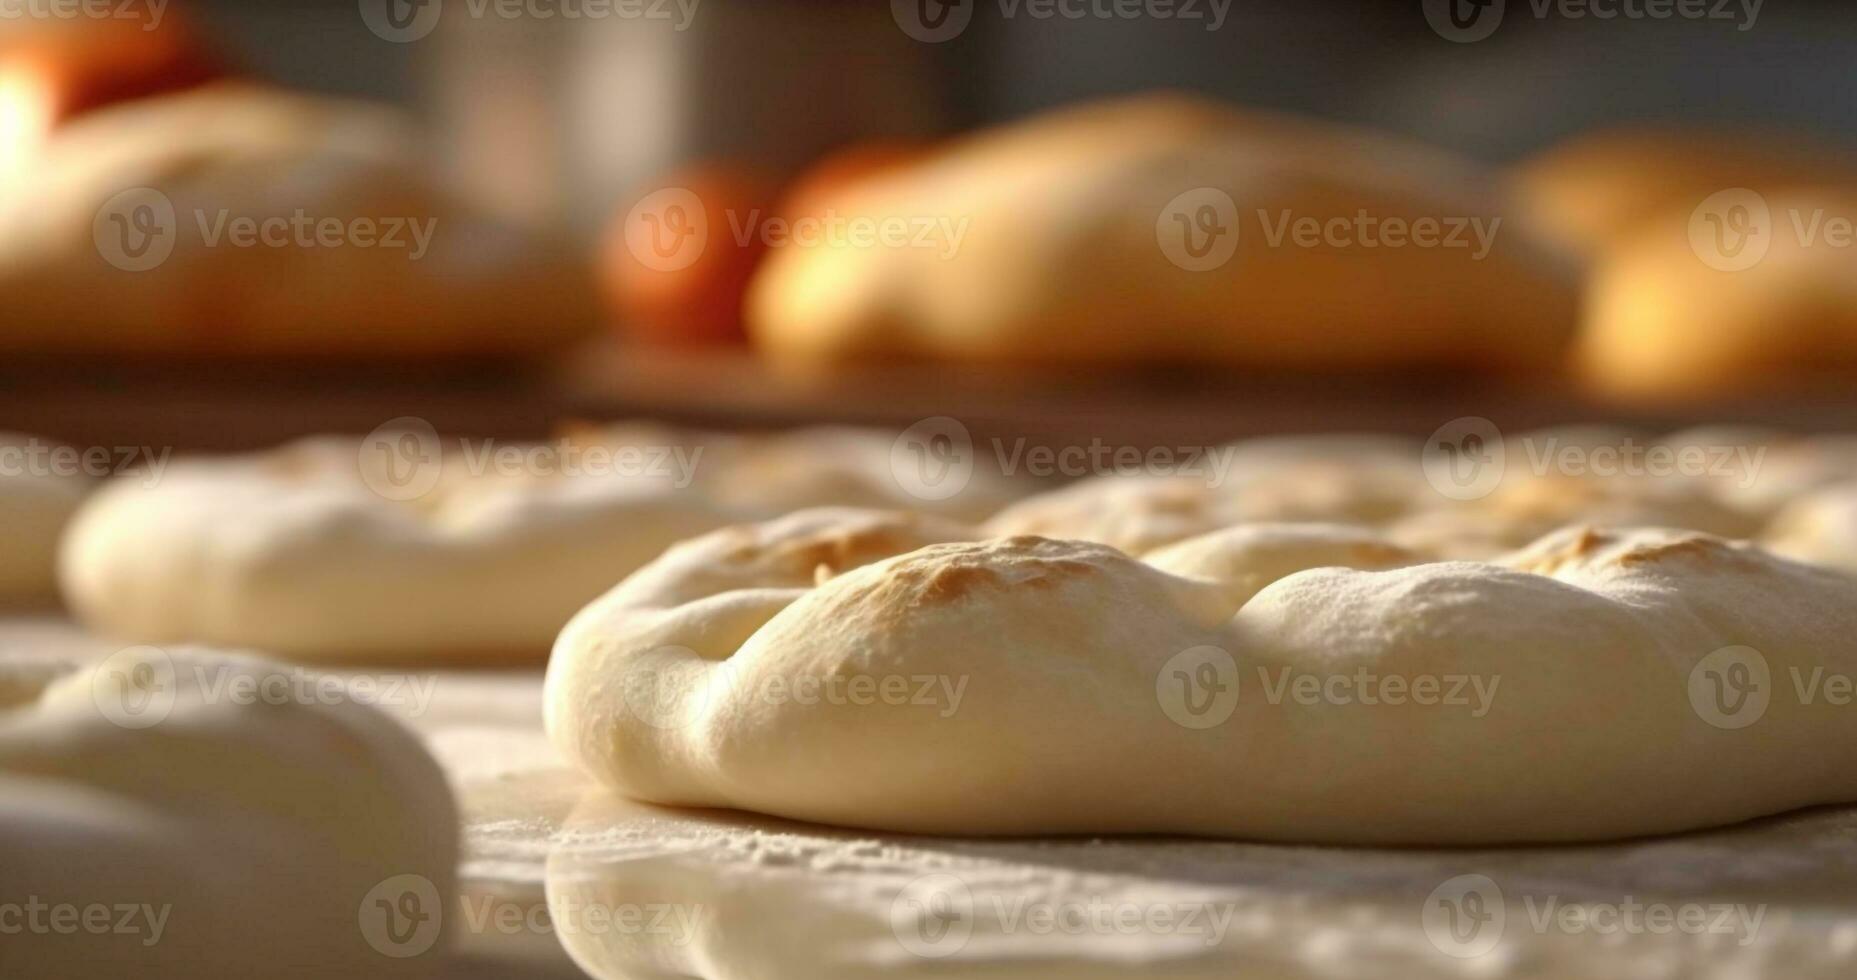 Freshly baked bread on wooden table, a homemade rustic meal generated by AI photo